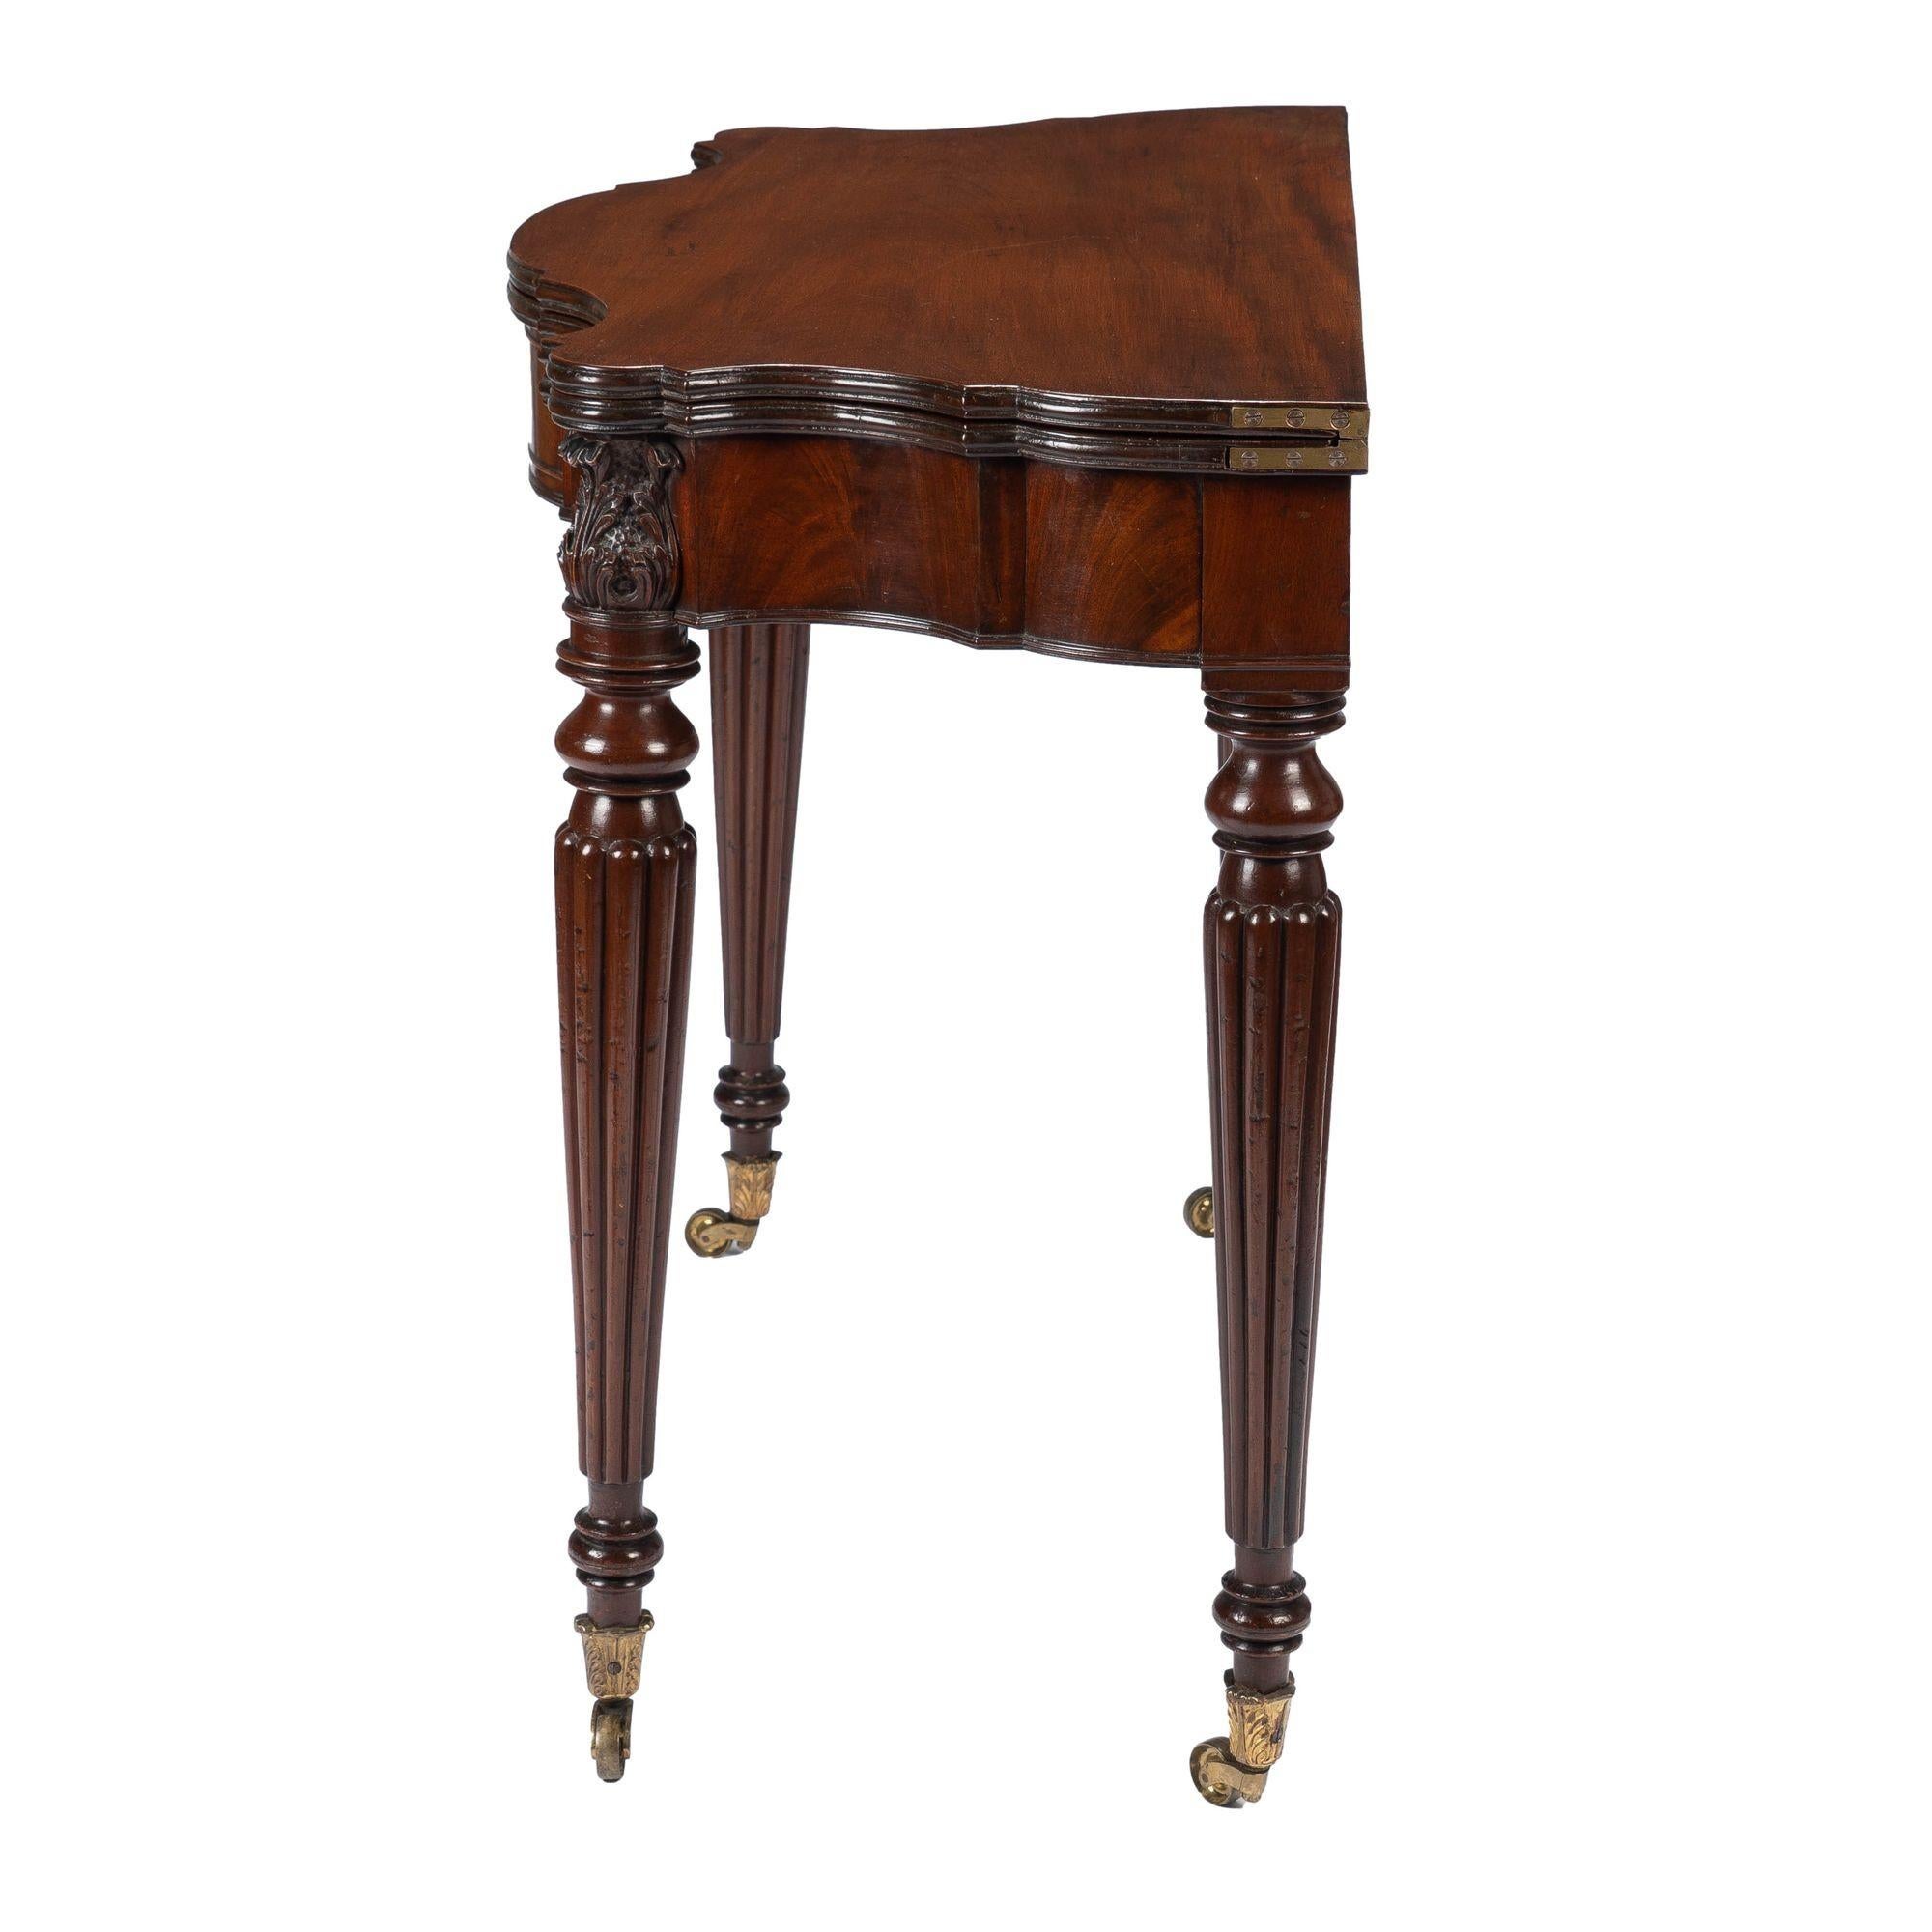 American Samuel Field Macintire Attributed Mahogany Flip Top Game Table, c. 1810-15 For Sale